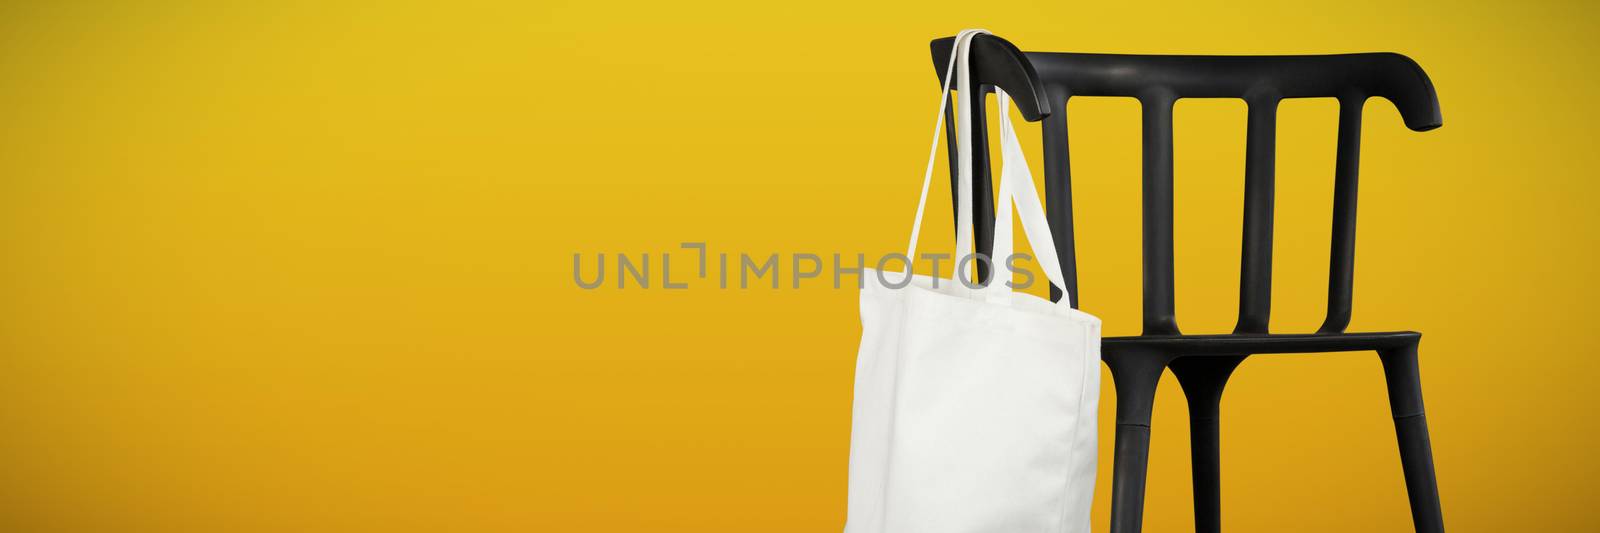 Composite image of canvas bag by Wavebreakmedia